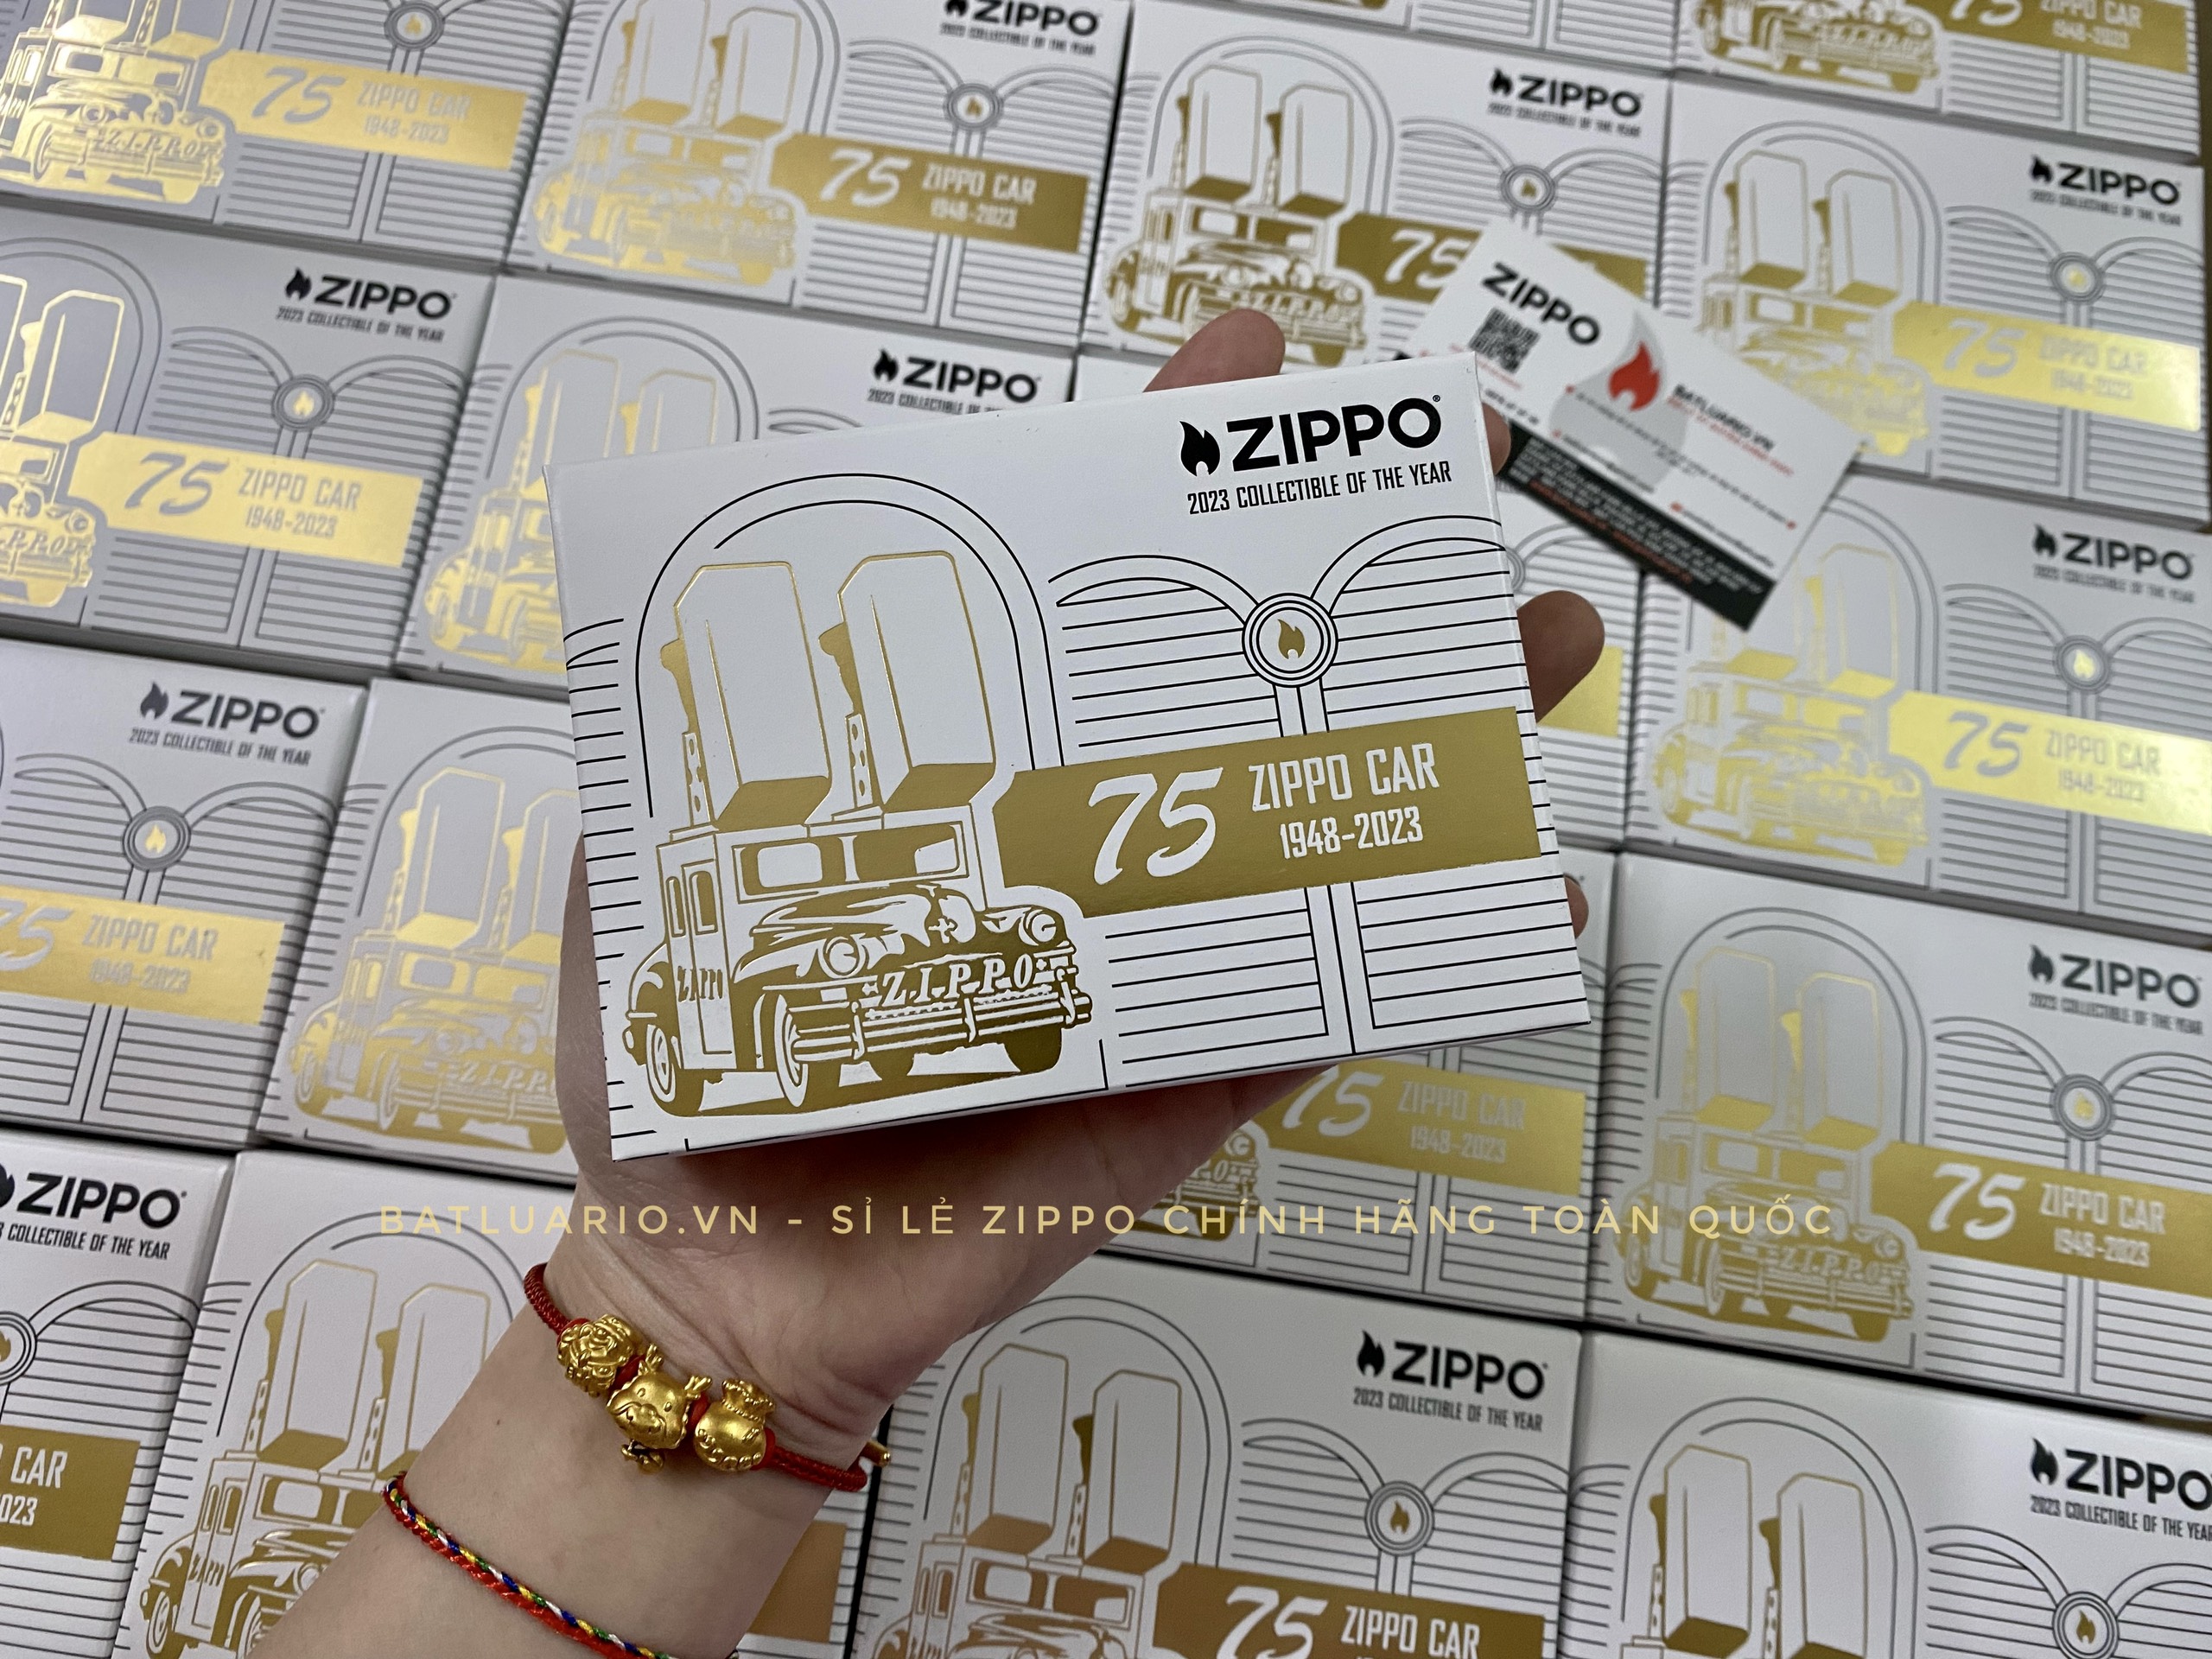 Zippo 48692 - Zippo 2023 Collectible Of The Year - Zippo Car 75th Anniversary Asia Pacific Limited Edition - Zippo COTY 2023 - Honoring 75 Years Of The Zippo Car 3